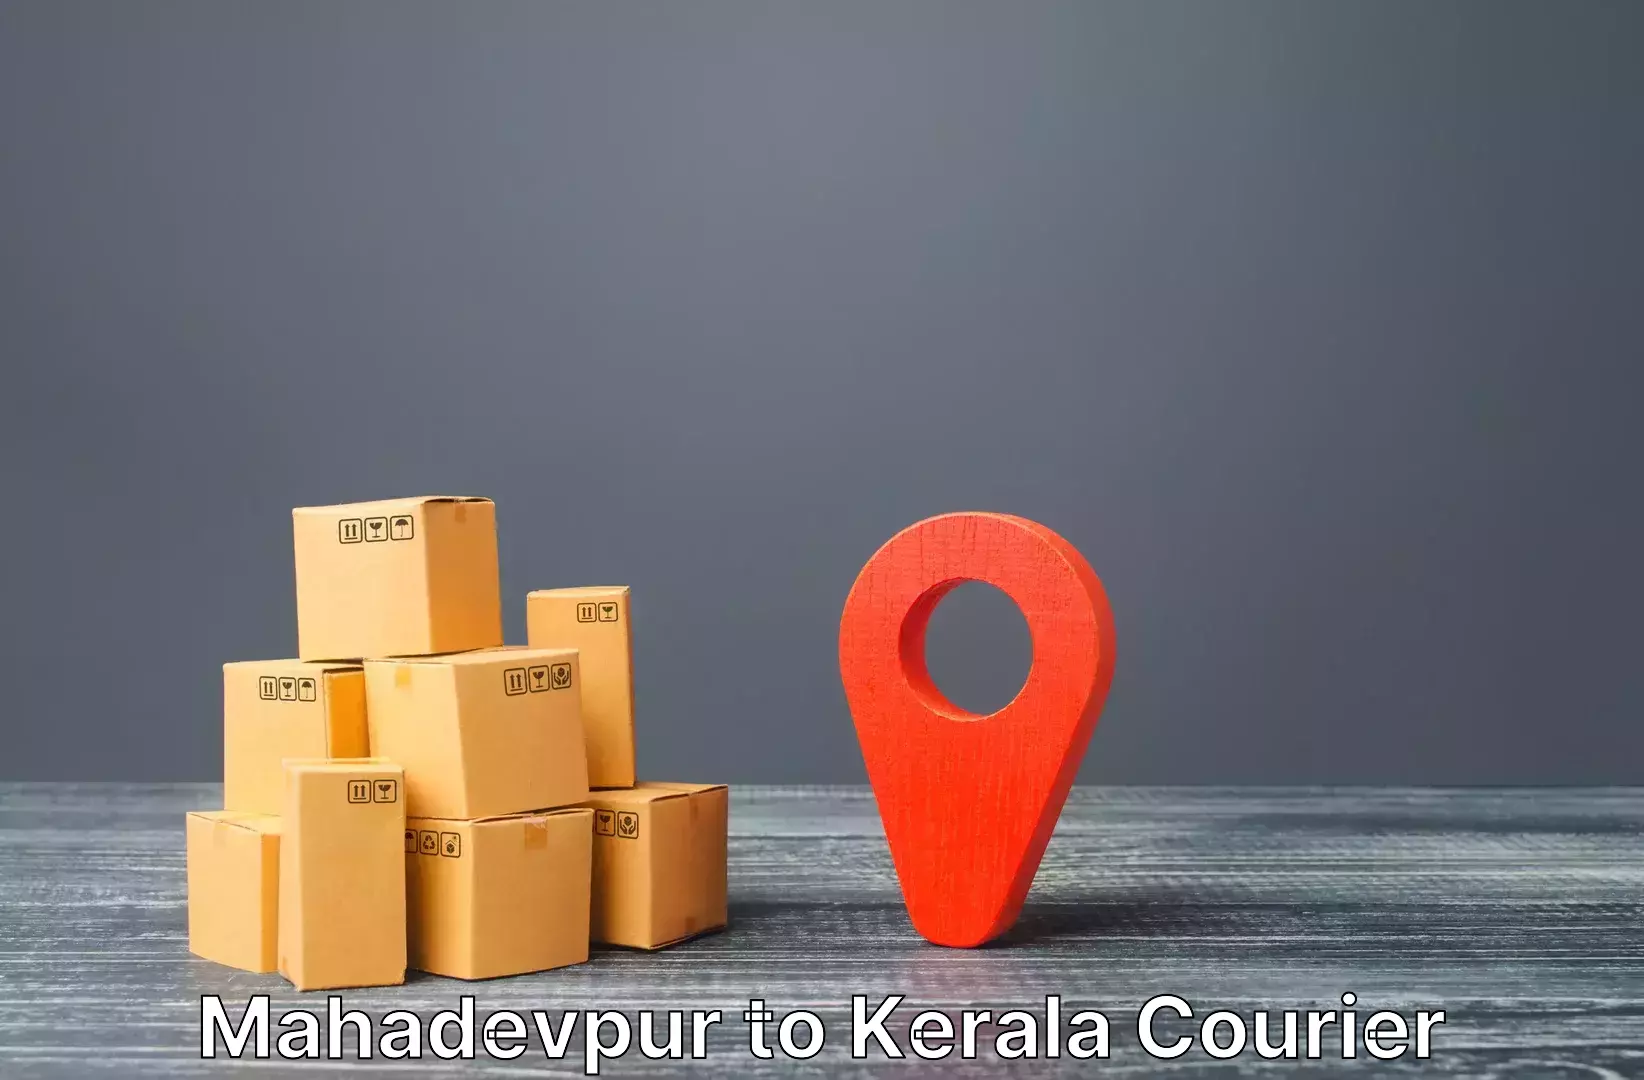 Reliable baggage delivery Mahadevpur to Cochin Port Kochi